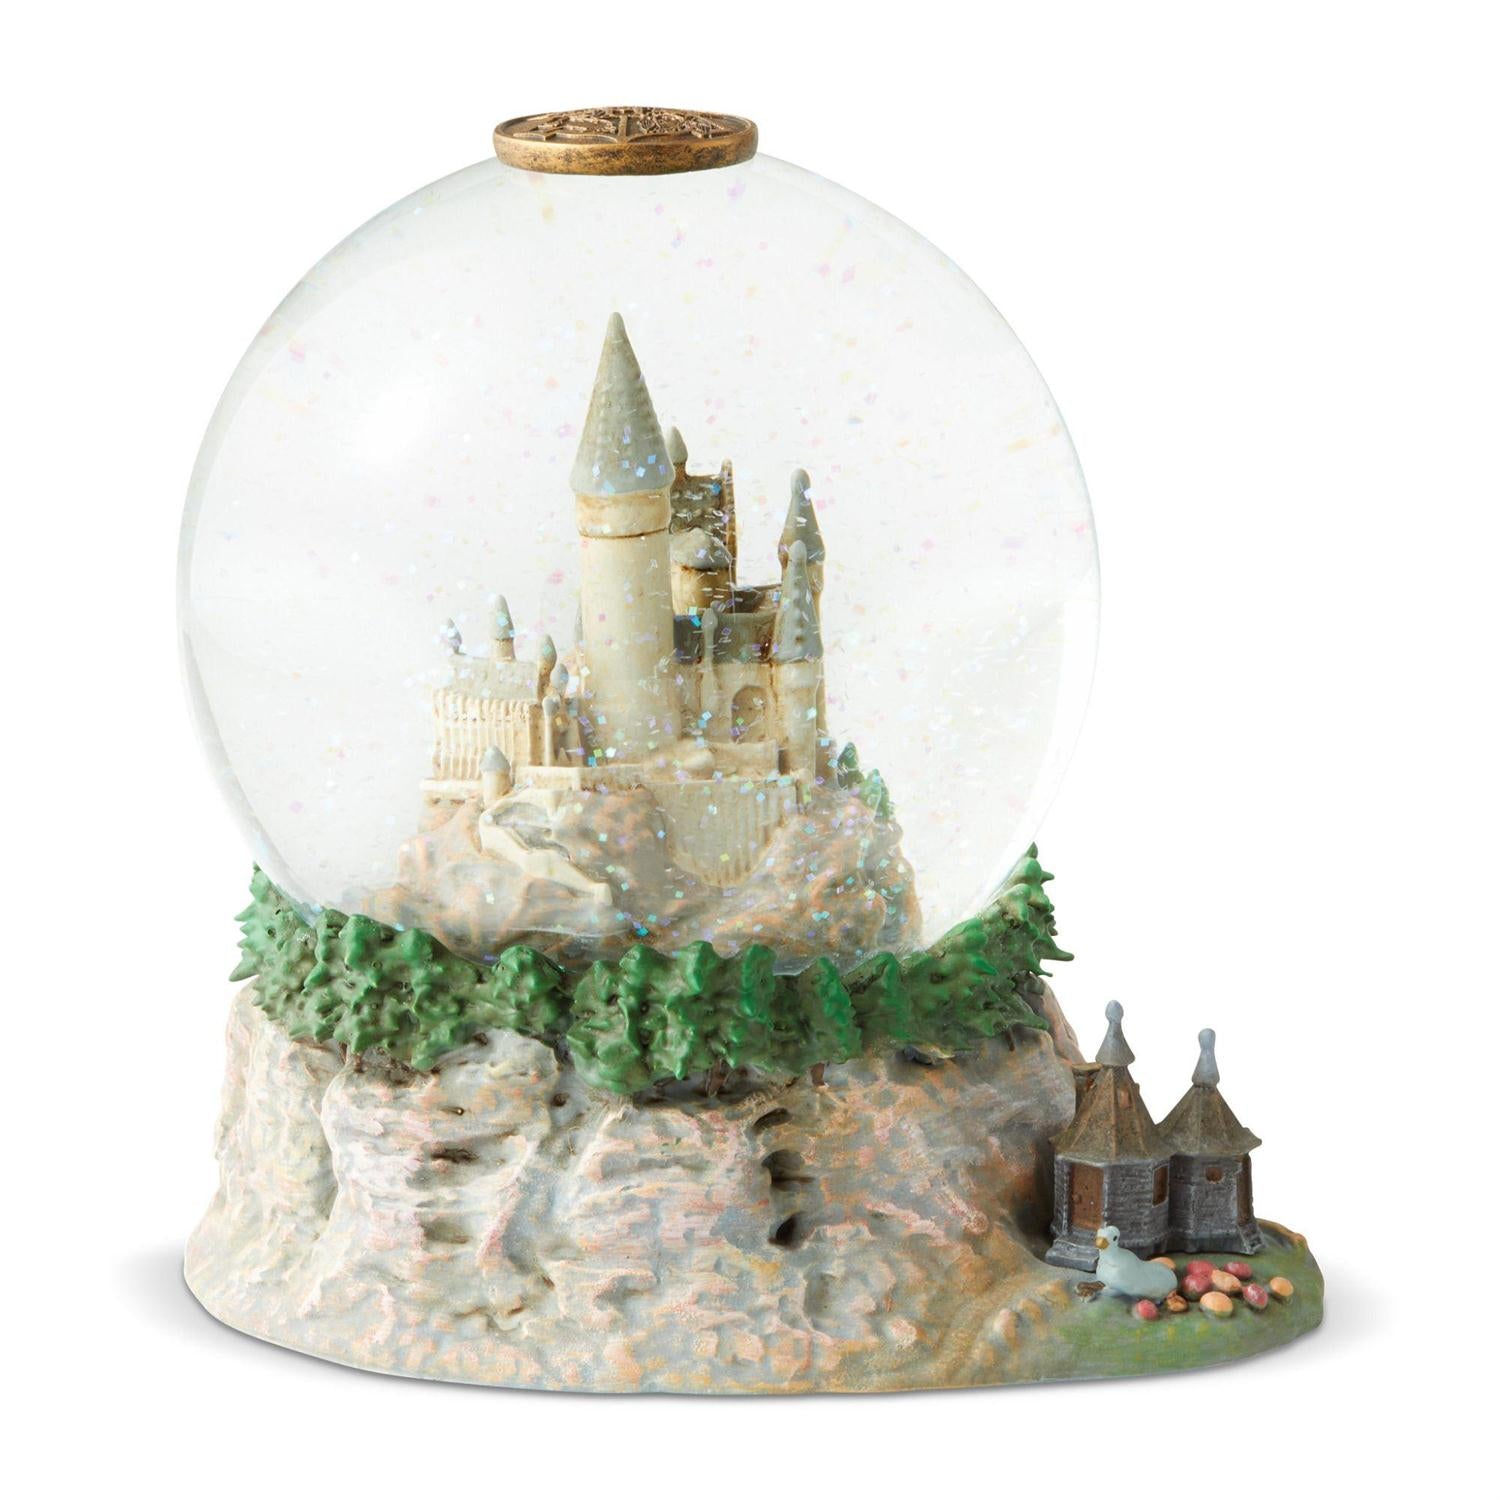 Hogwarts castle - front view water ball